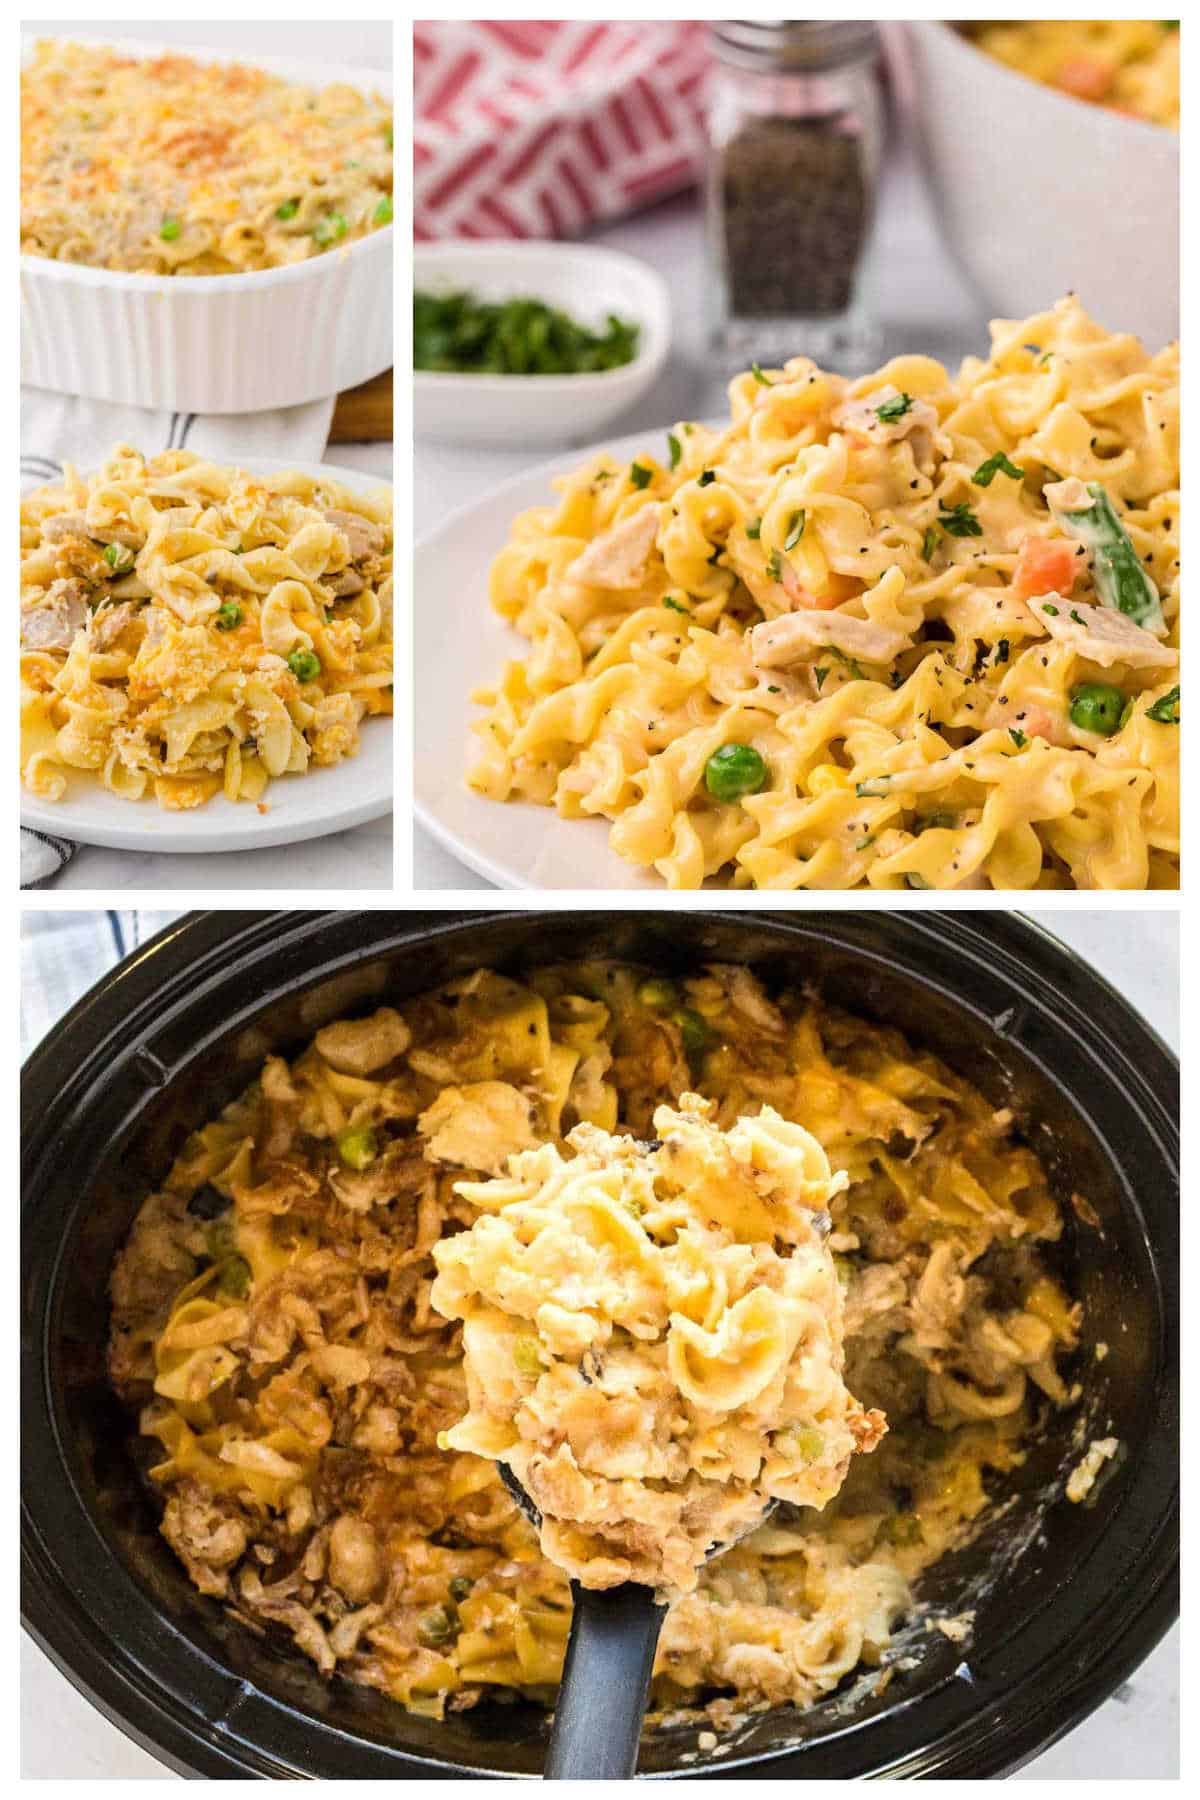 Different Tuna Casserole Recipes made in the crockpot, on the stovetop and classic tuna casserole that has been baked in the oven.